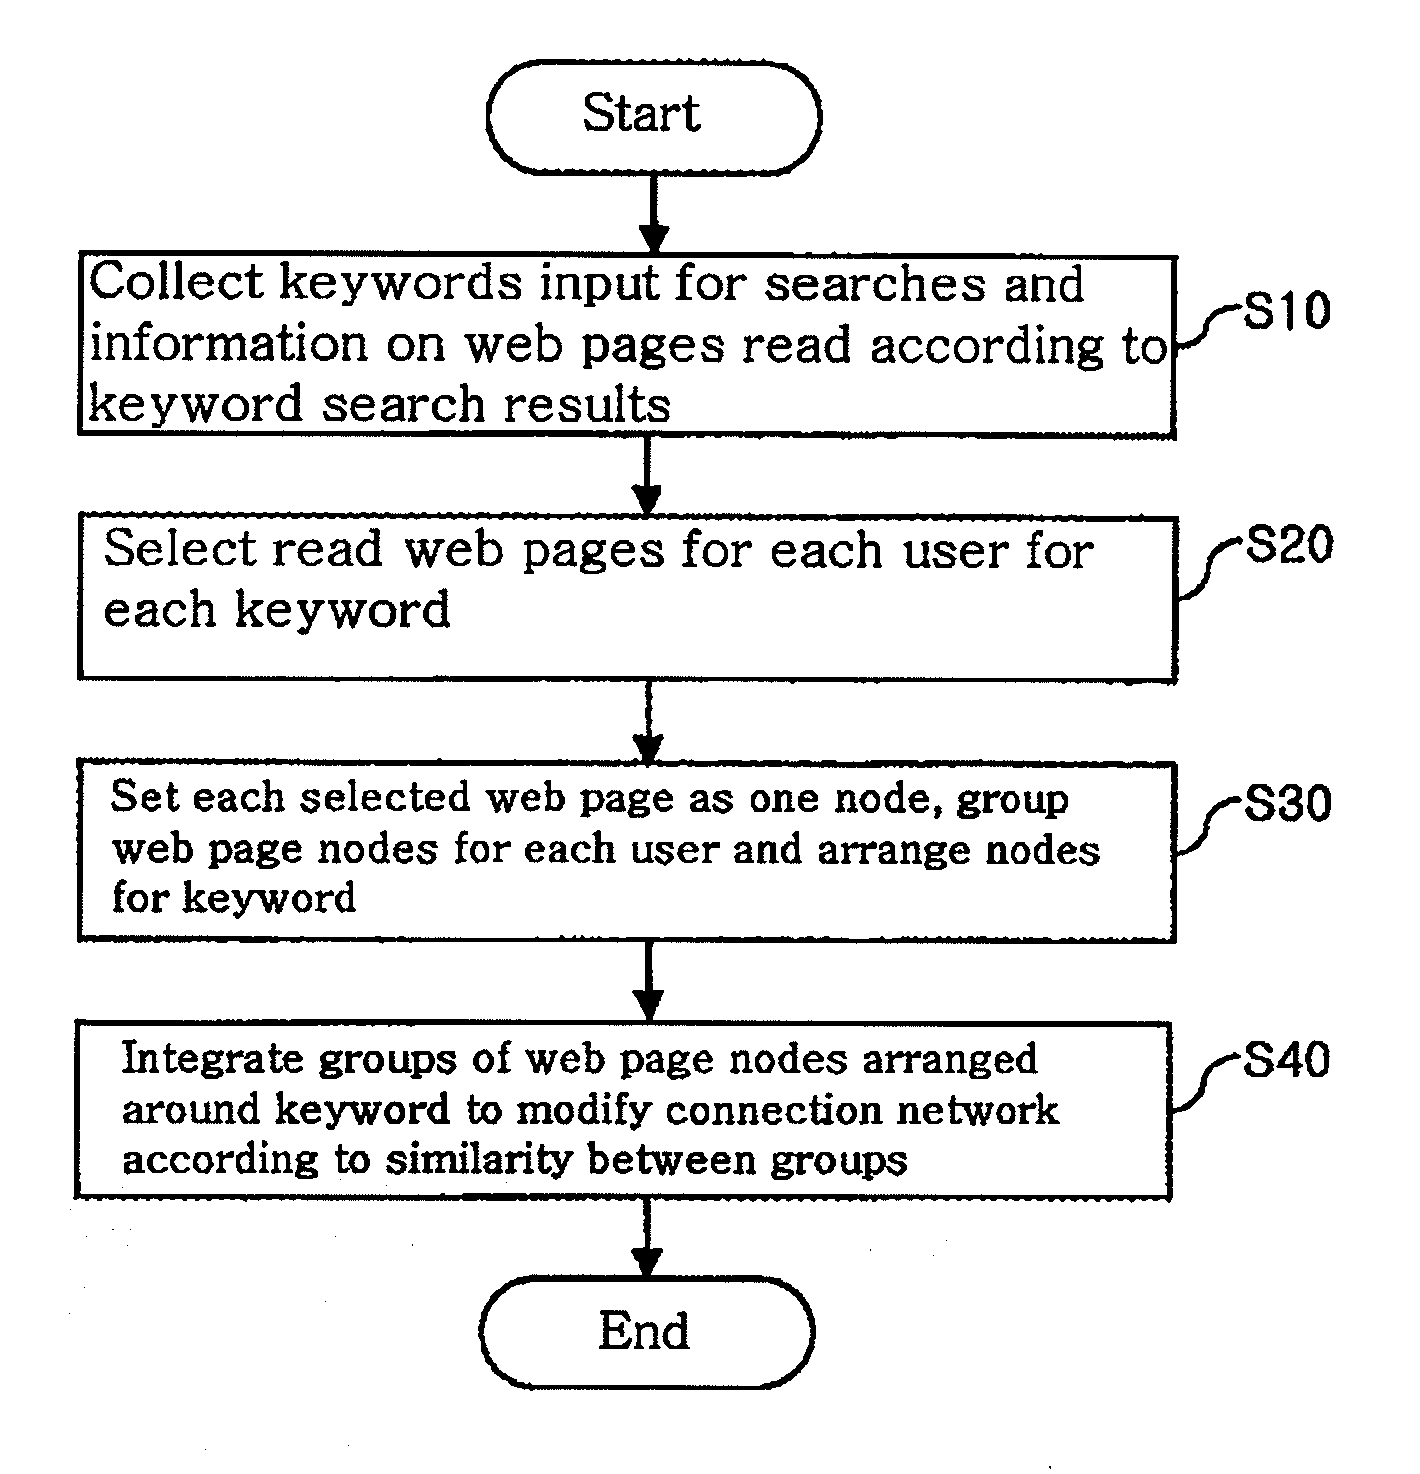 System and Method for Building Multi-Concept Network Based on User's Web Usage Data